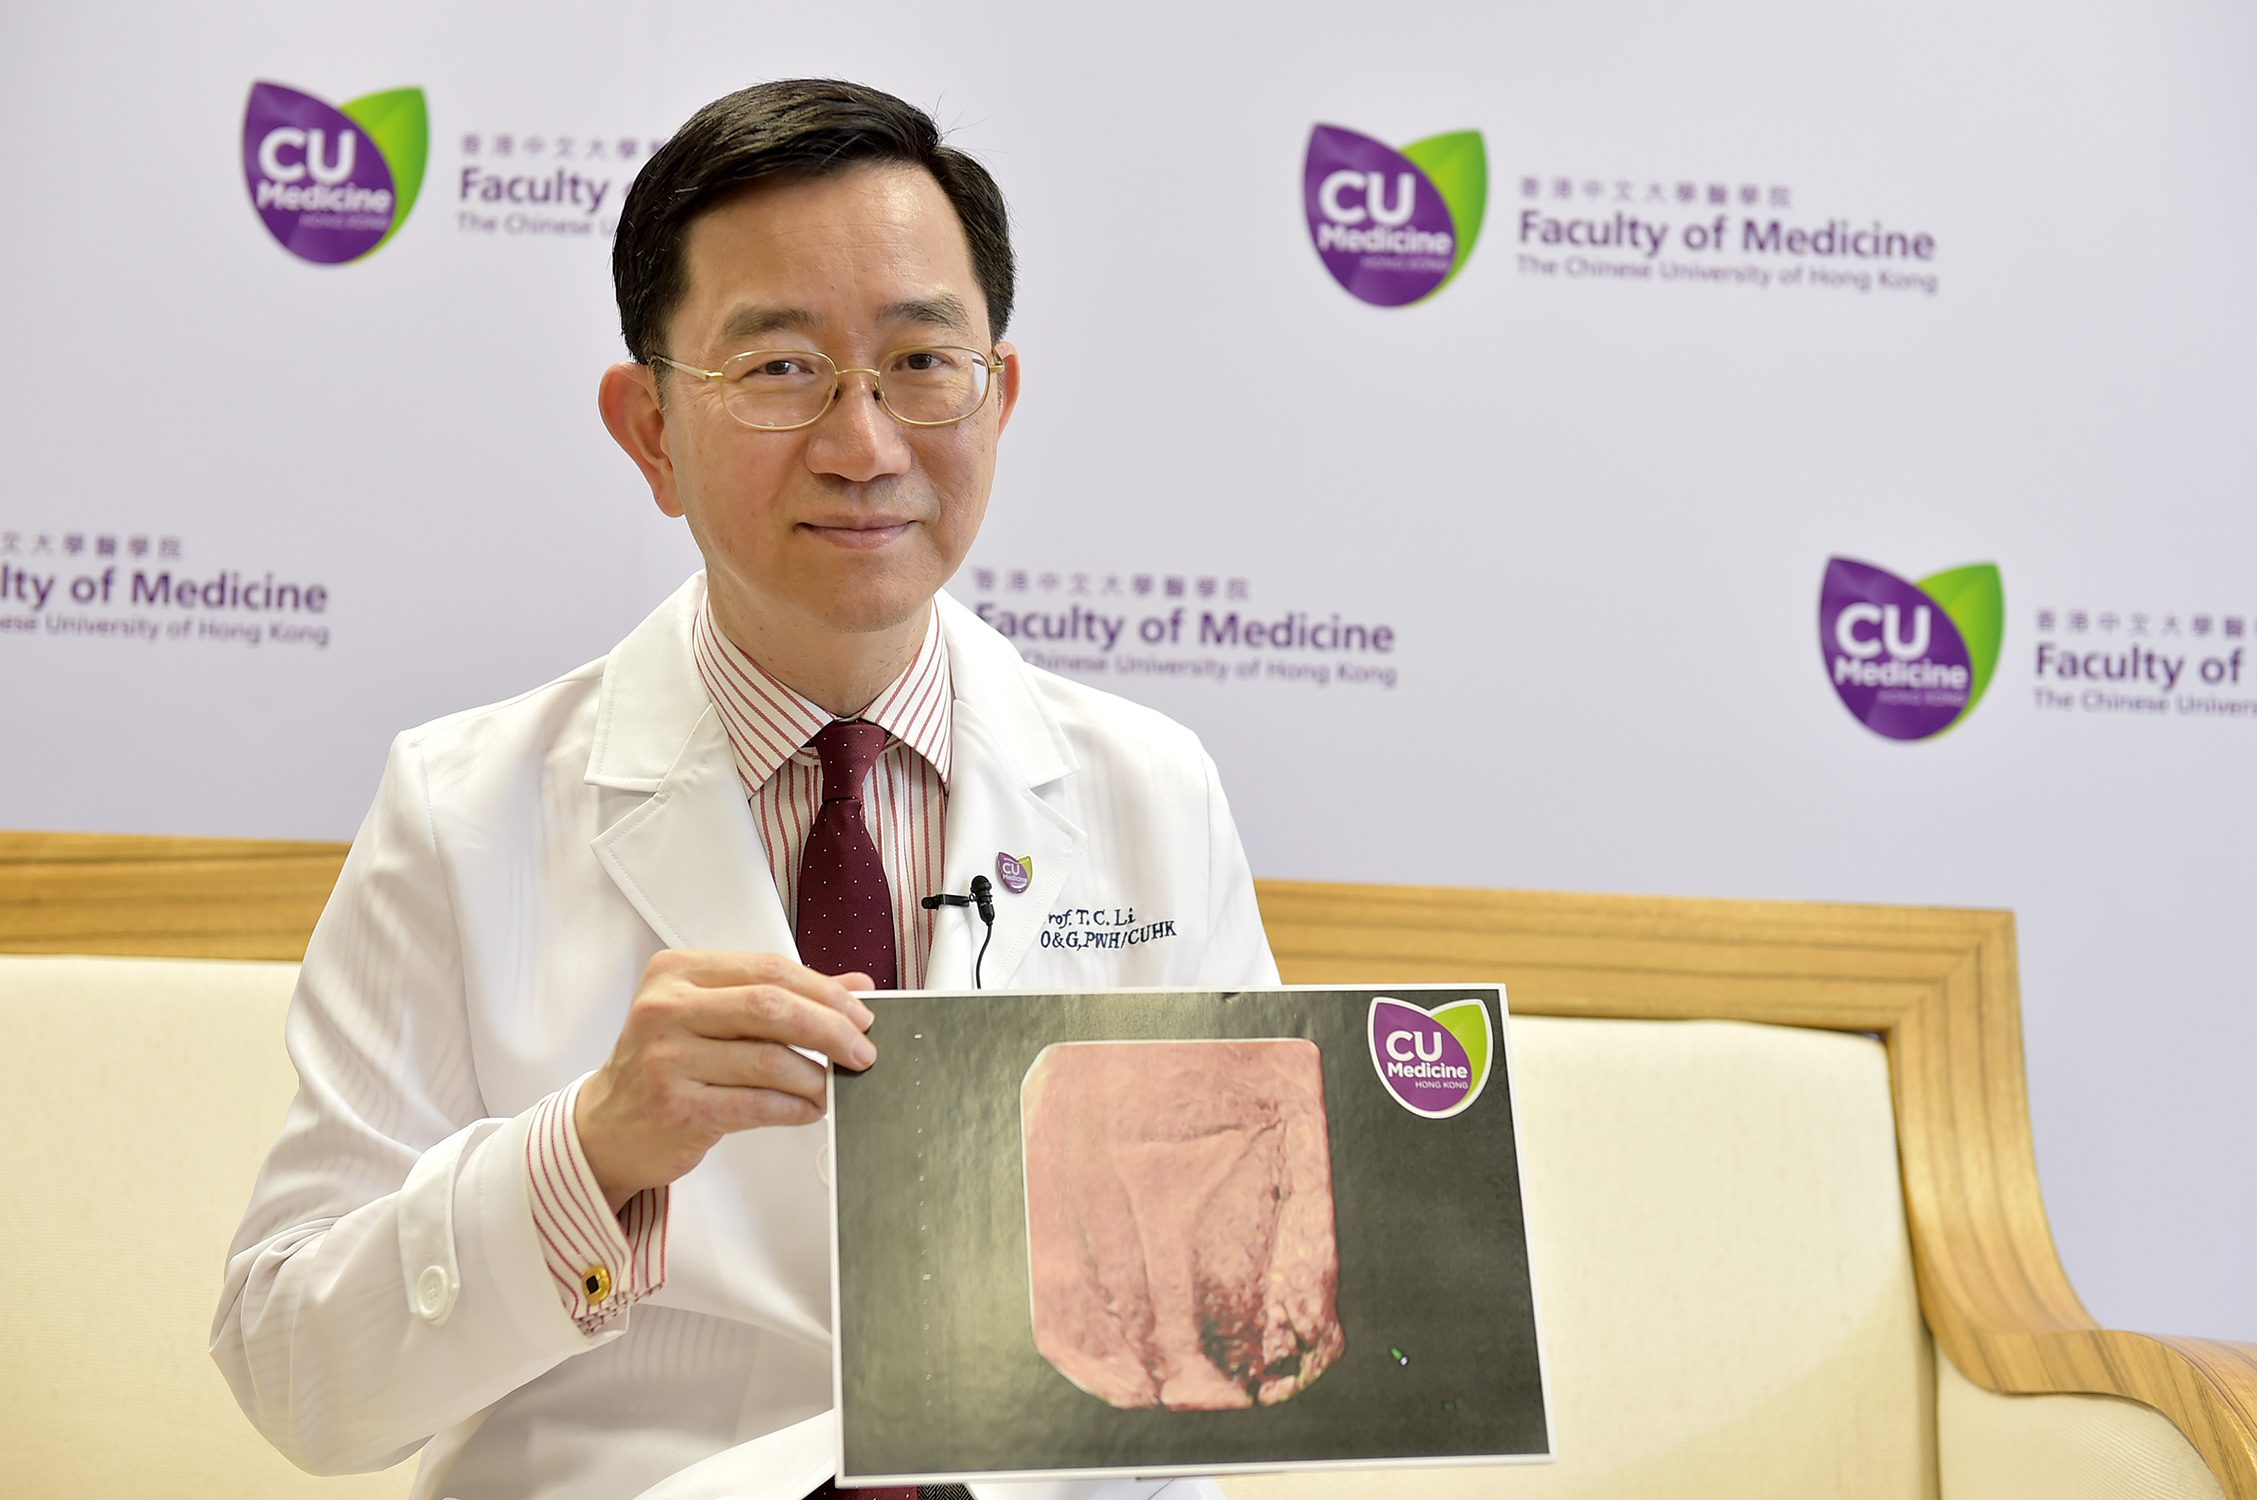 Prof. Li Tin-chiu, Professor, Department of Obstetrics and Gynaecology, Faculty of Medicine